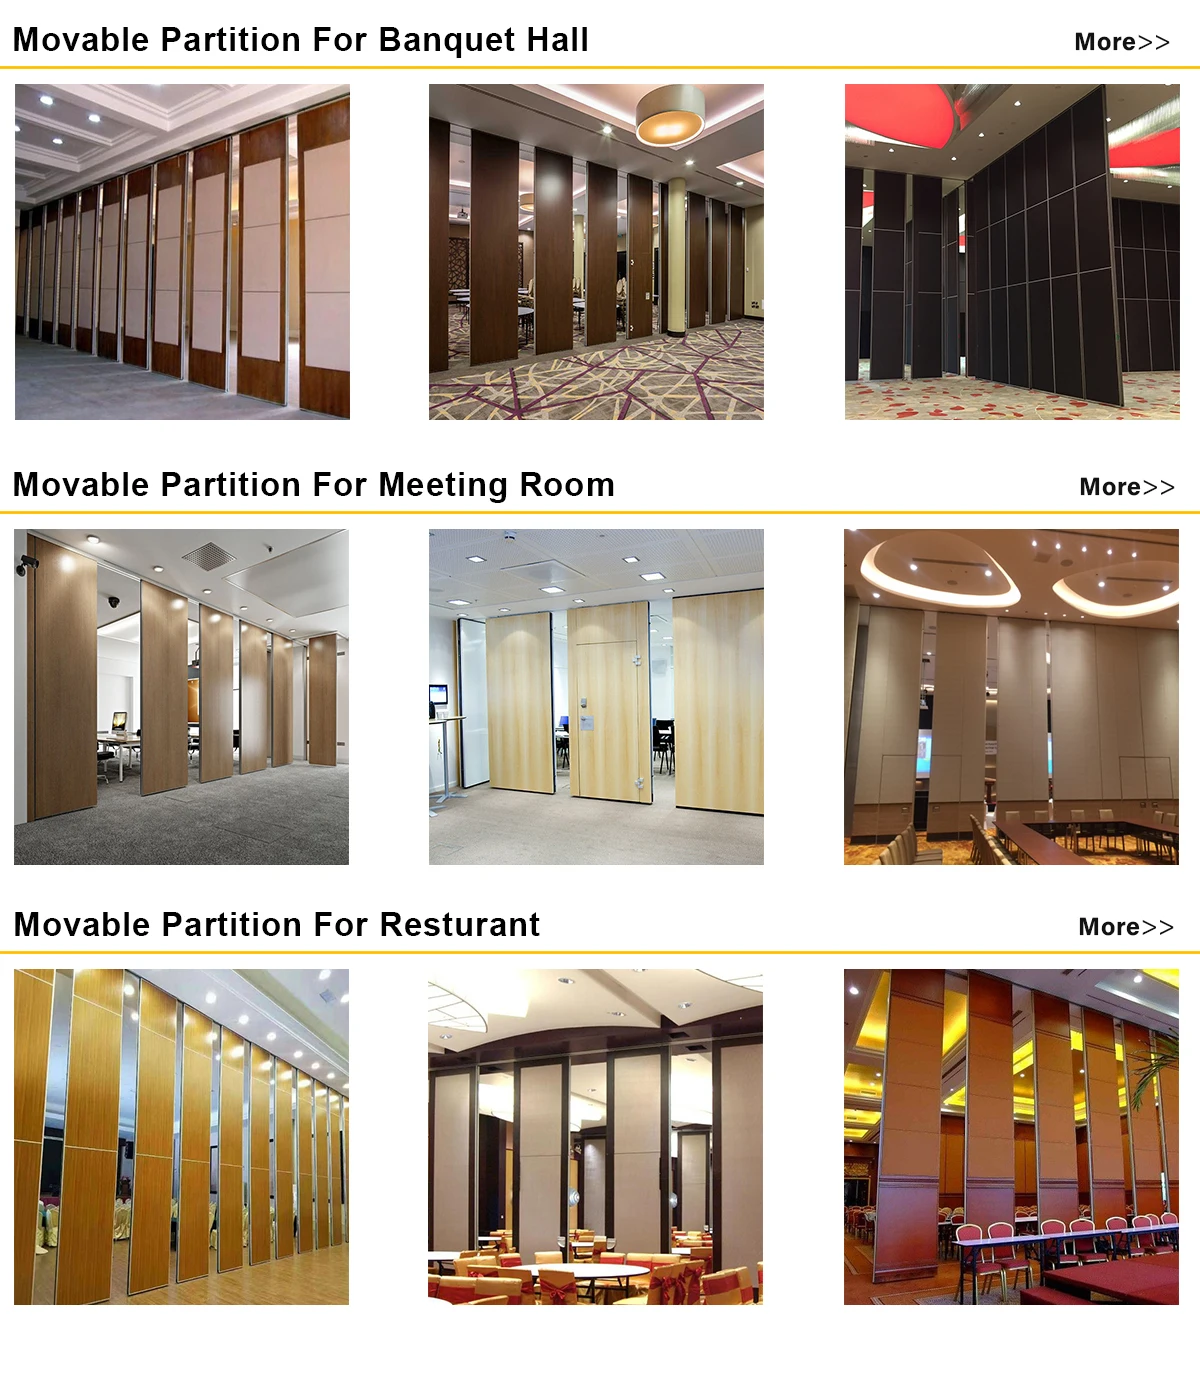 Hotel Acoustic Soundproof Sliding Fordable Partition Walls Design - Buy Soundproof Sliding Fordable Partition Walls Design,Acoustic Soundproof Sliding Fordable Partition Walls,Hotel Acoustic Fordable Partition Walls Design Product on Alibaba.com